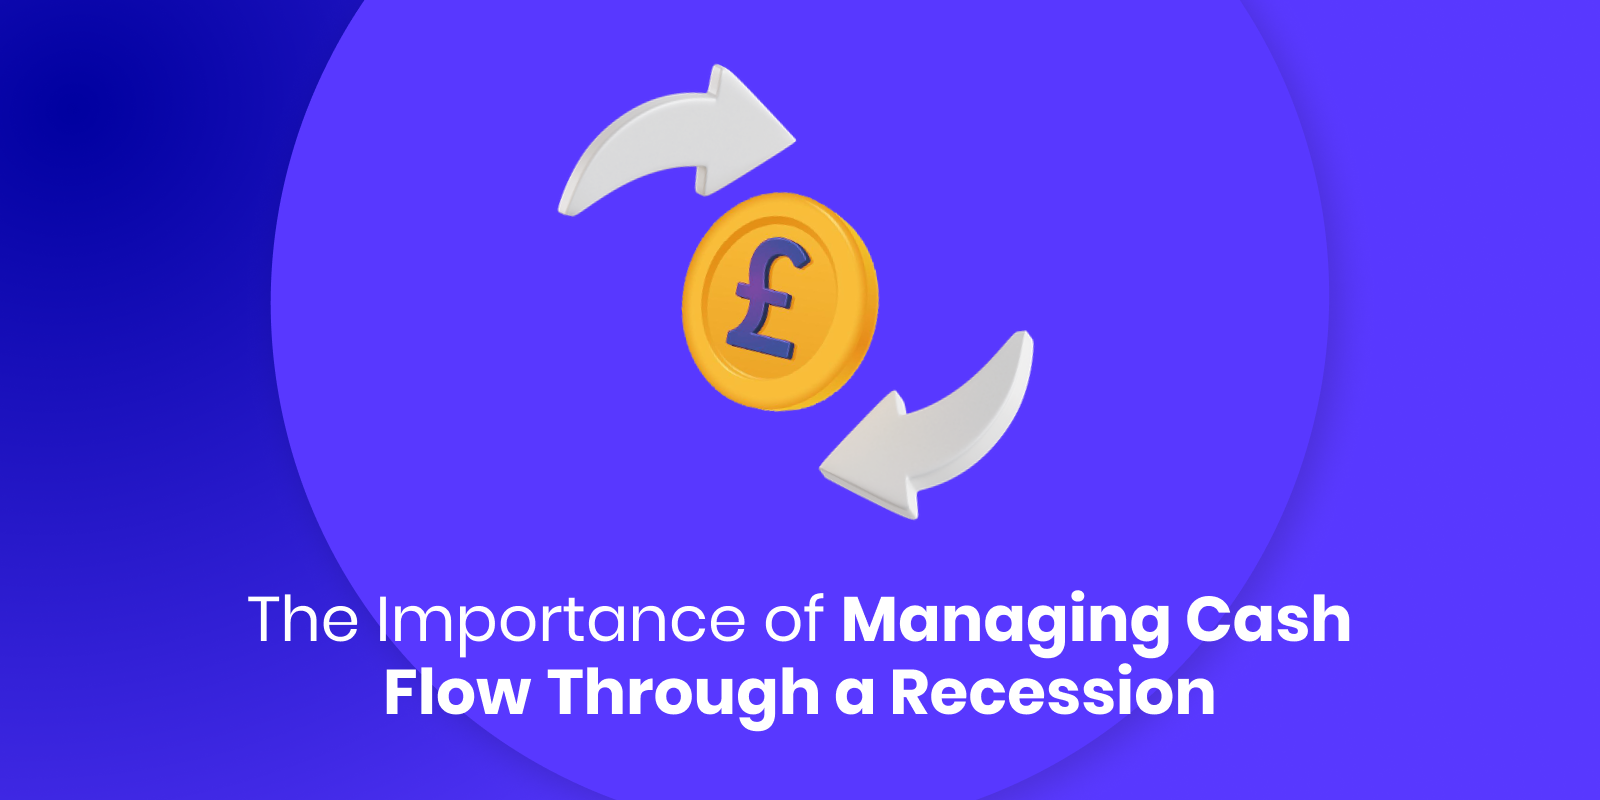 Managing Cash Flow Through a Recession with Hydr